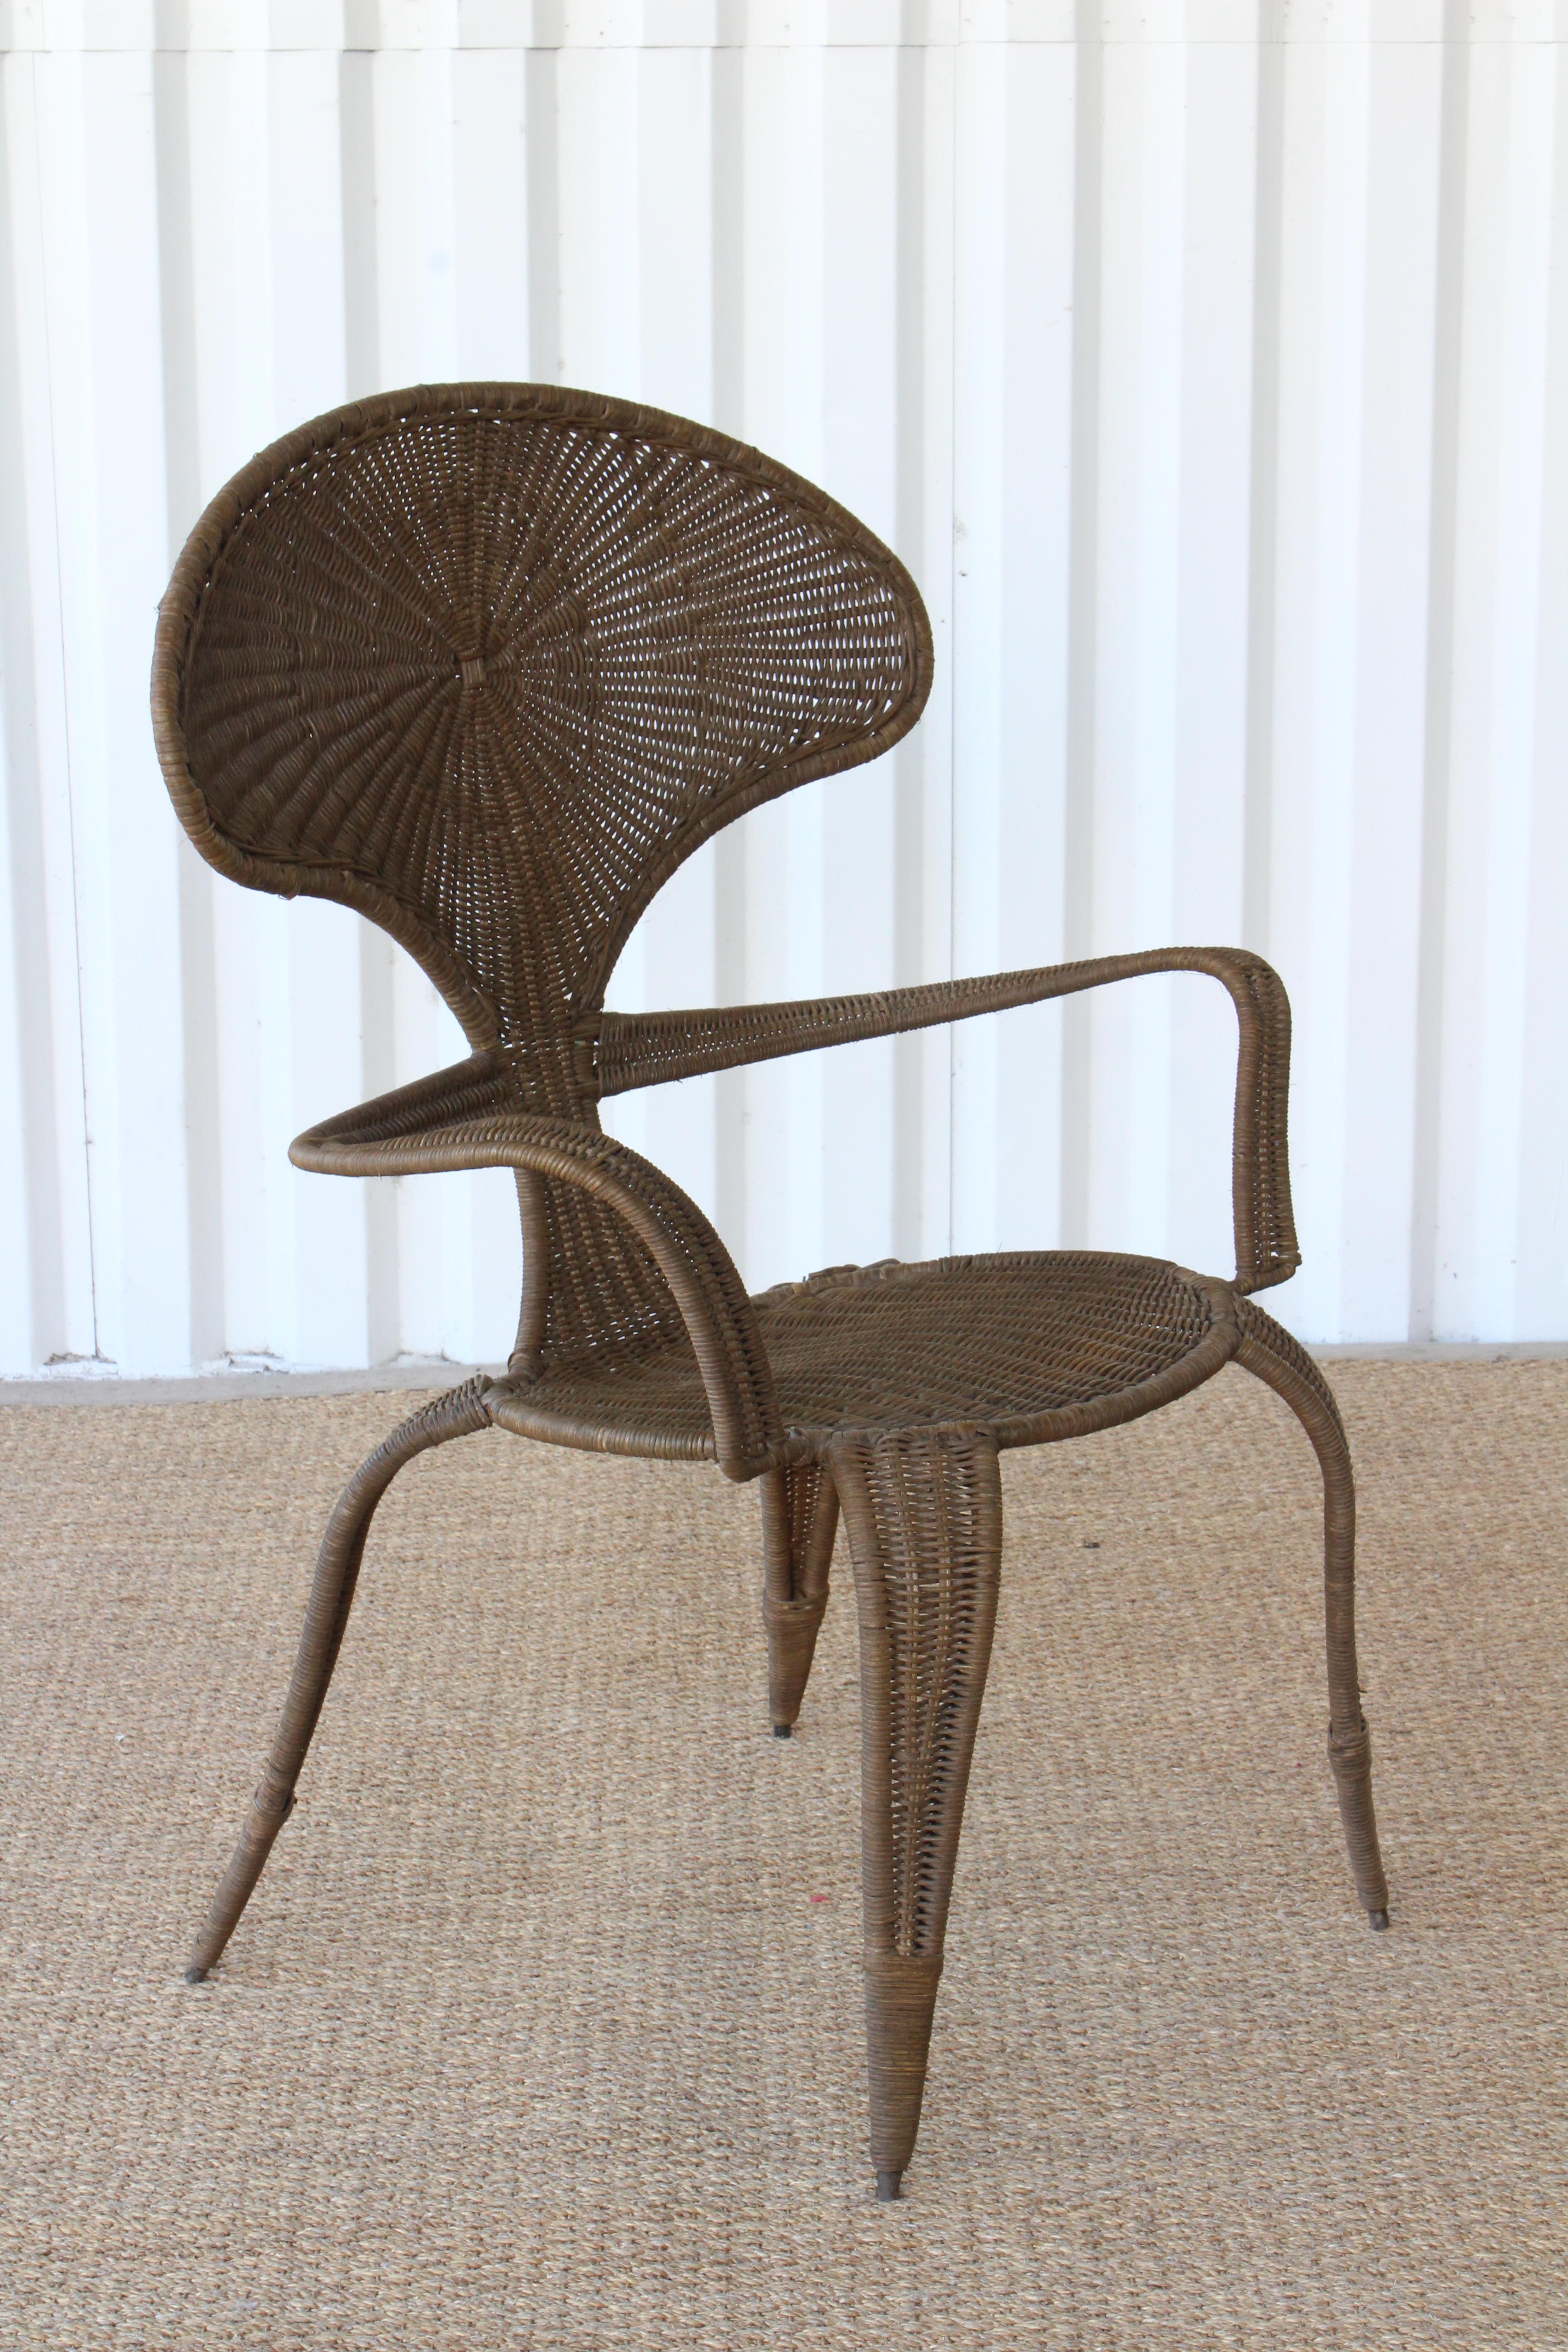 Mid-Century Modern Wicker and Iron Armchair by Danny Ho Fong, 1960s.